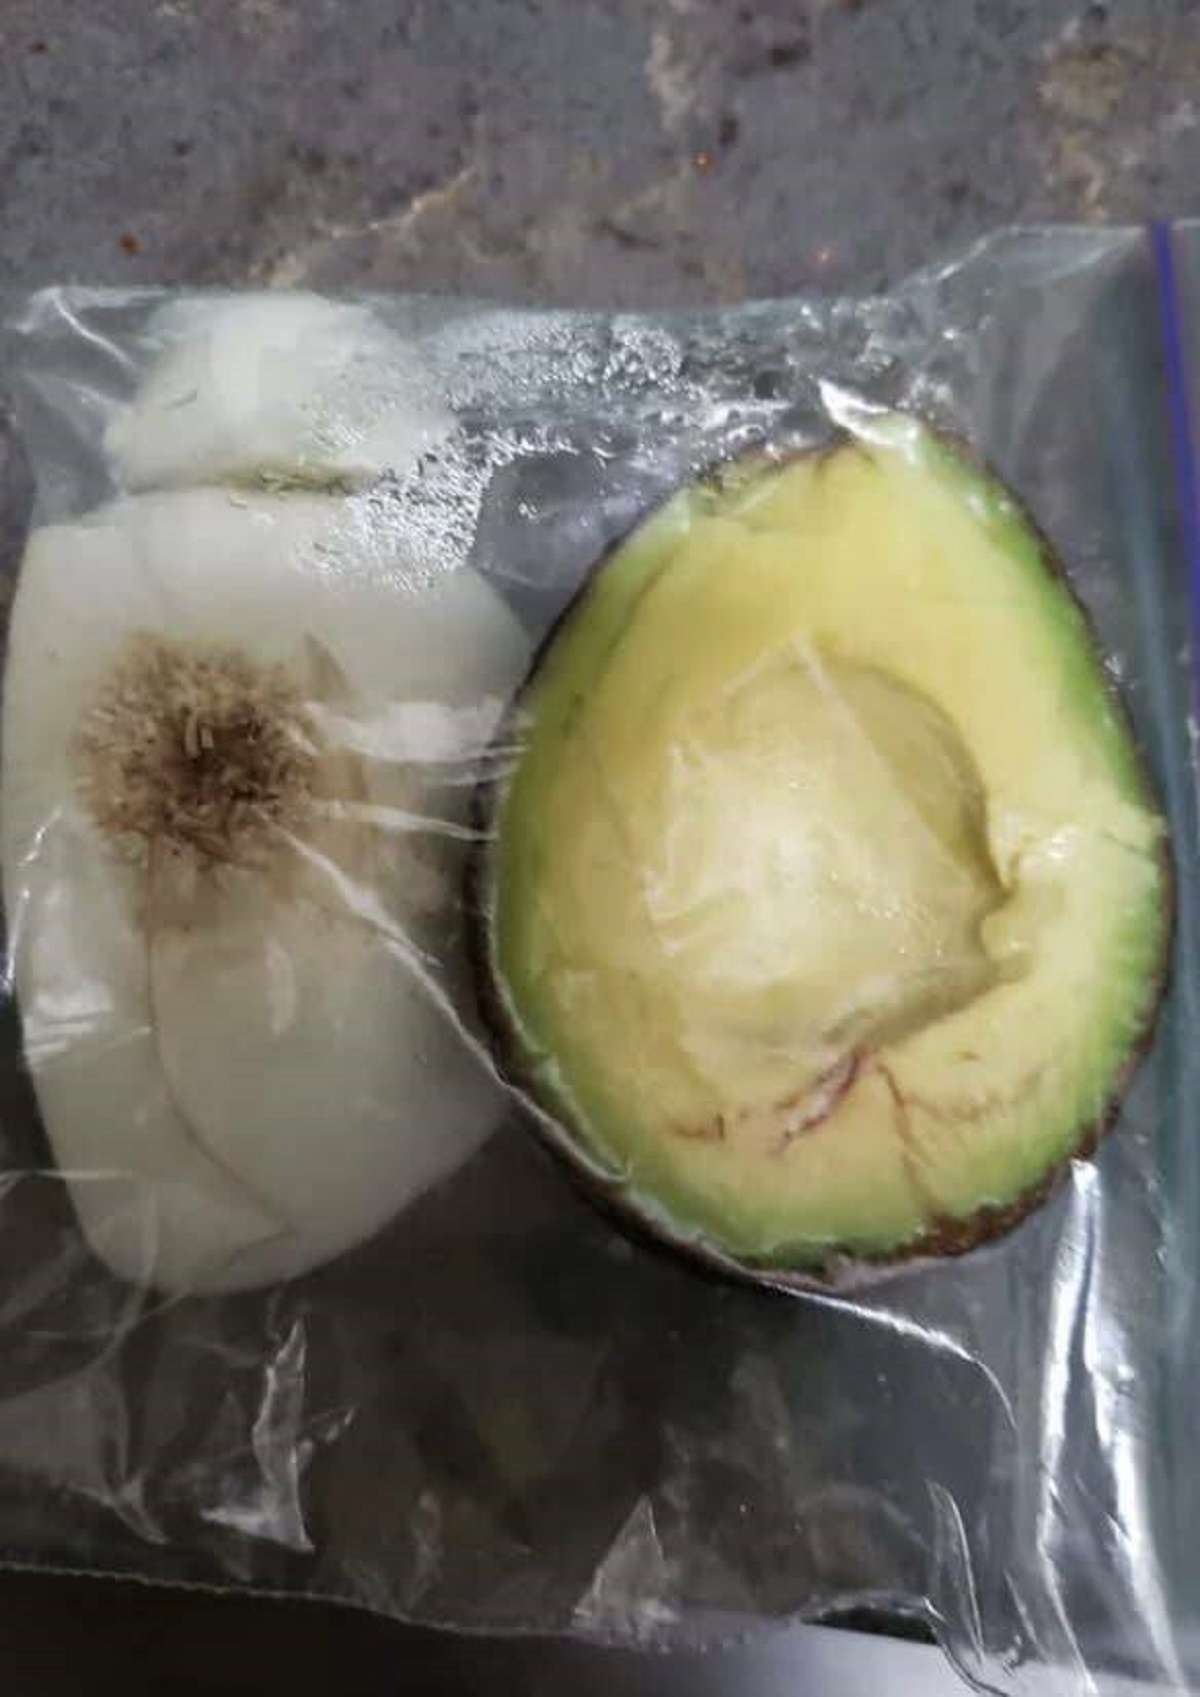 "Storing an avocado with onion in the refrigerator keeps the avocado fresh for days. I learned this by accident and found out it's actually a thing*."

"The onion releases sulfur, which causes a chemical reaction that prevents oxygen from interacting with the enzymes in the avocado and, thus, keeps it from browning."